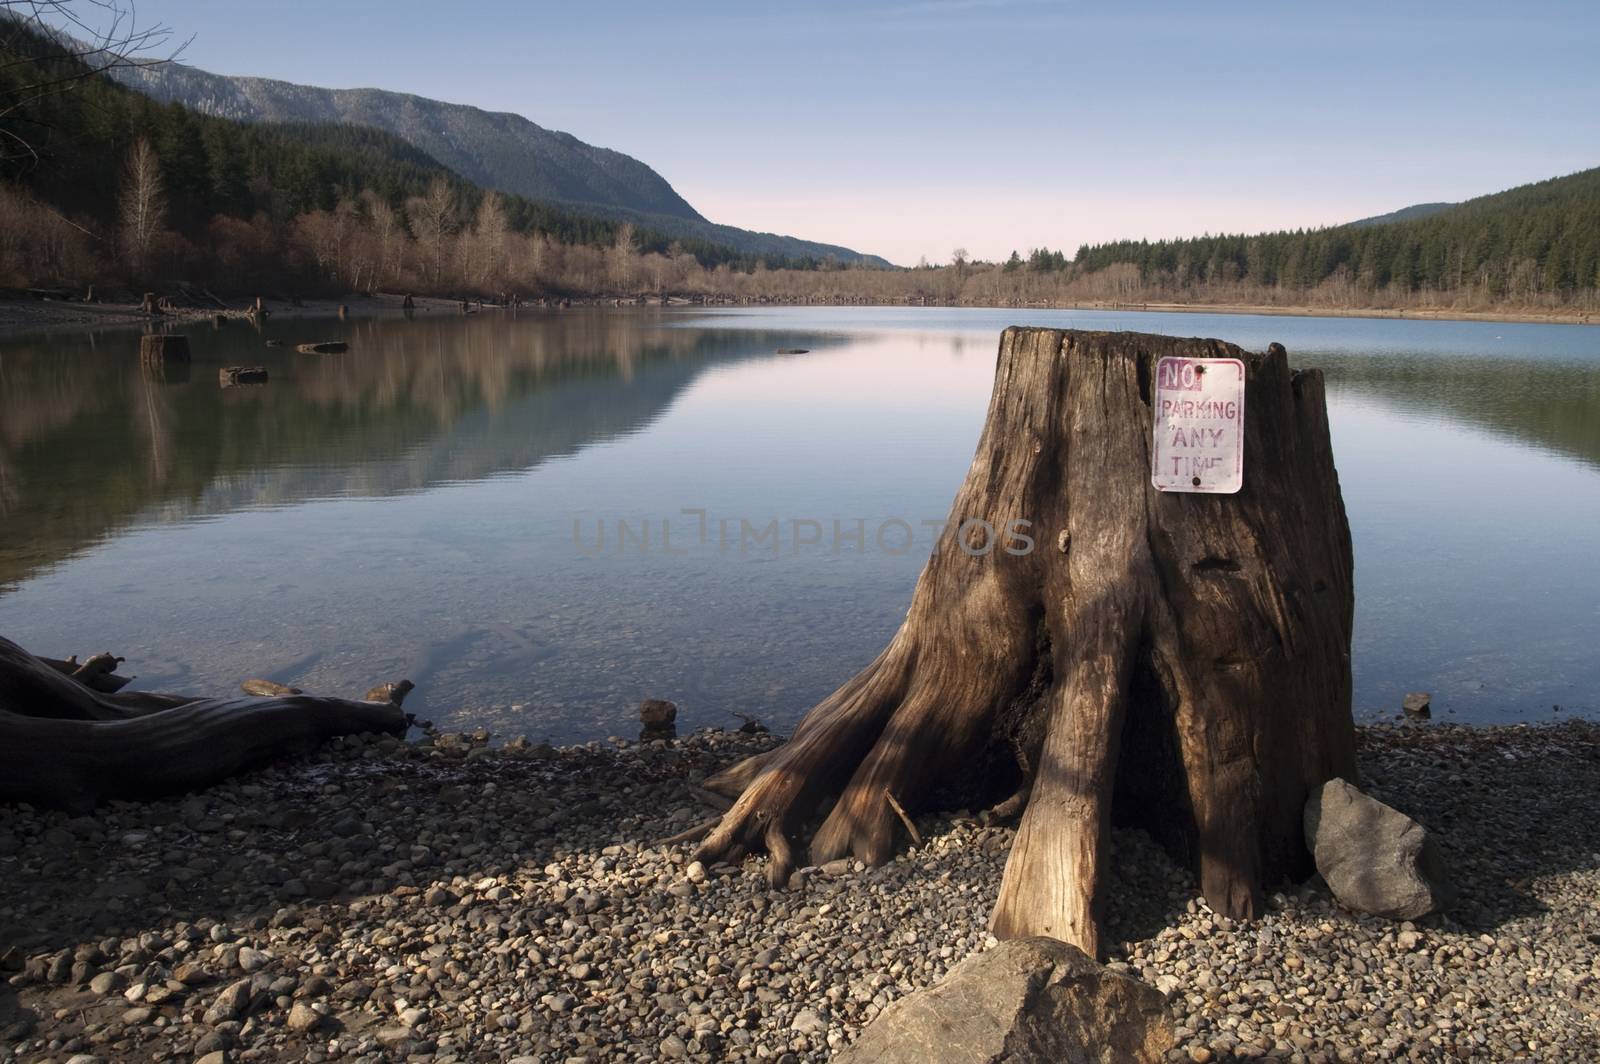 Tree Stump No Parking Sign Rattlesnake Lake North Cascade Mountains by ChrisBoswell